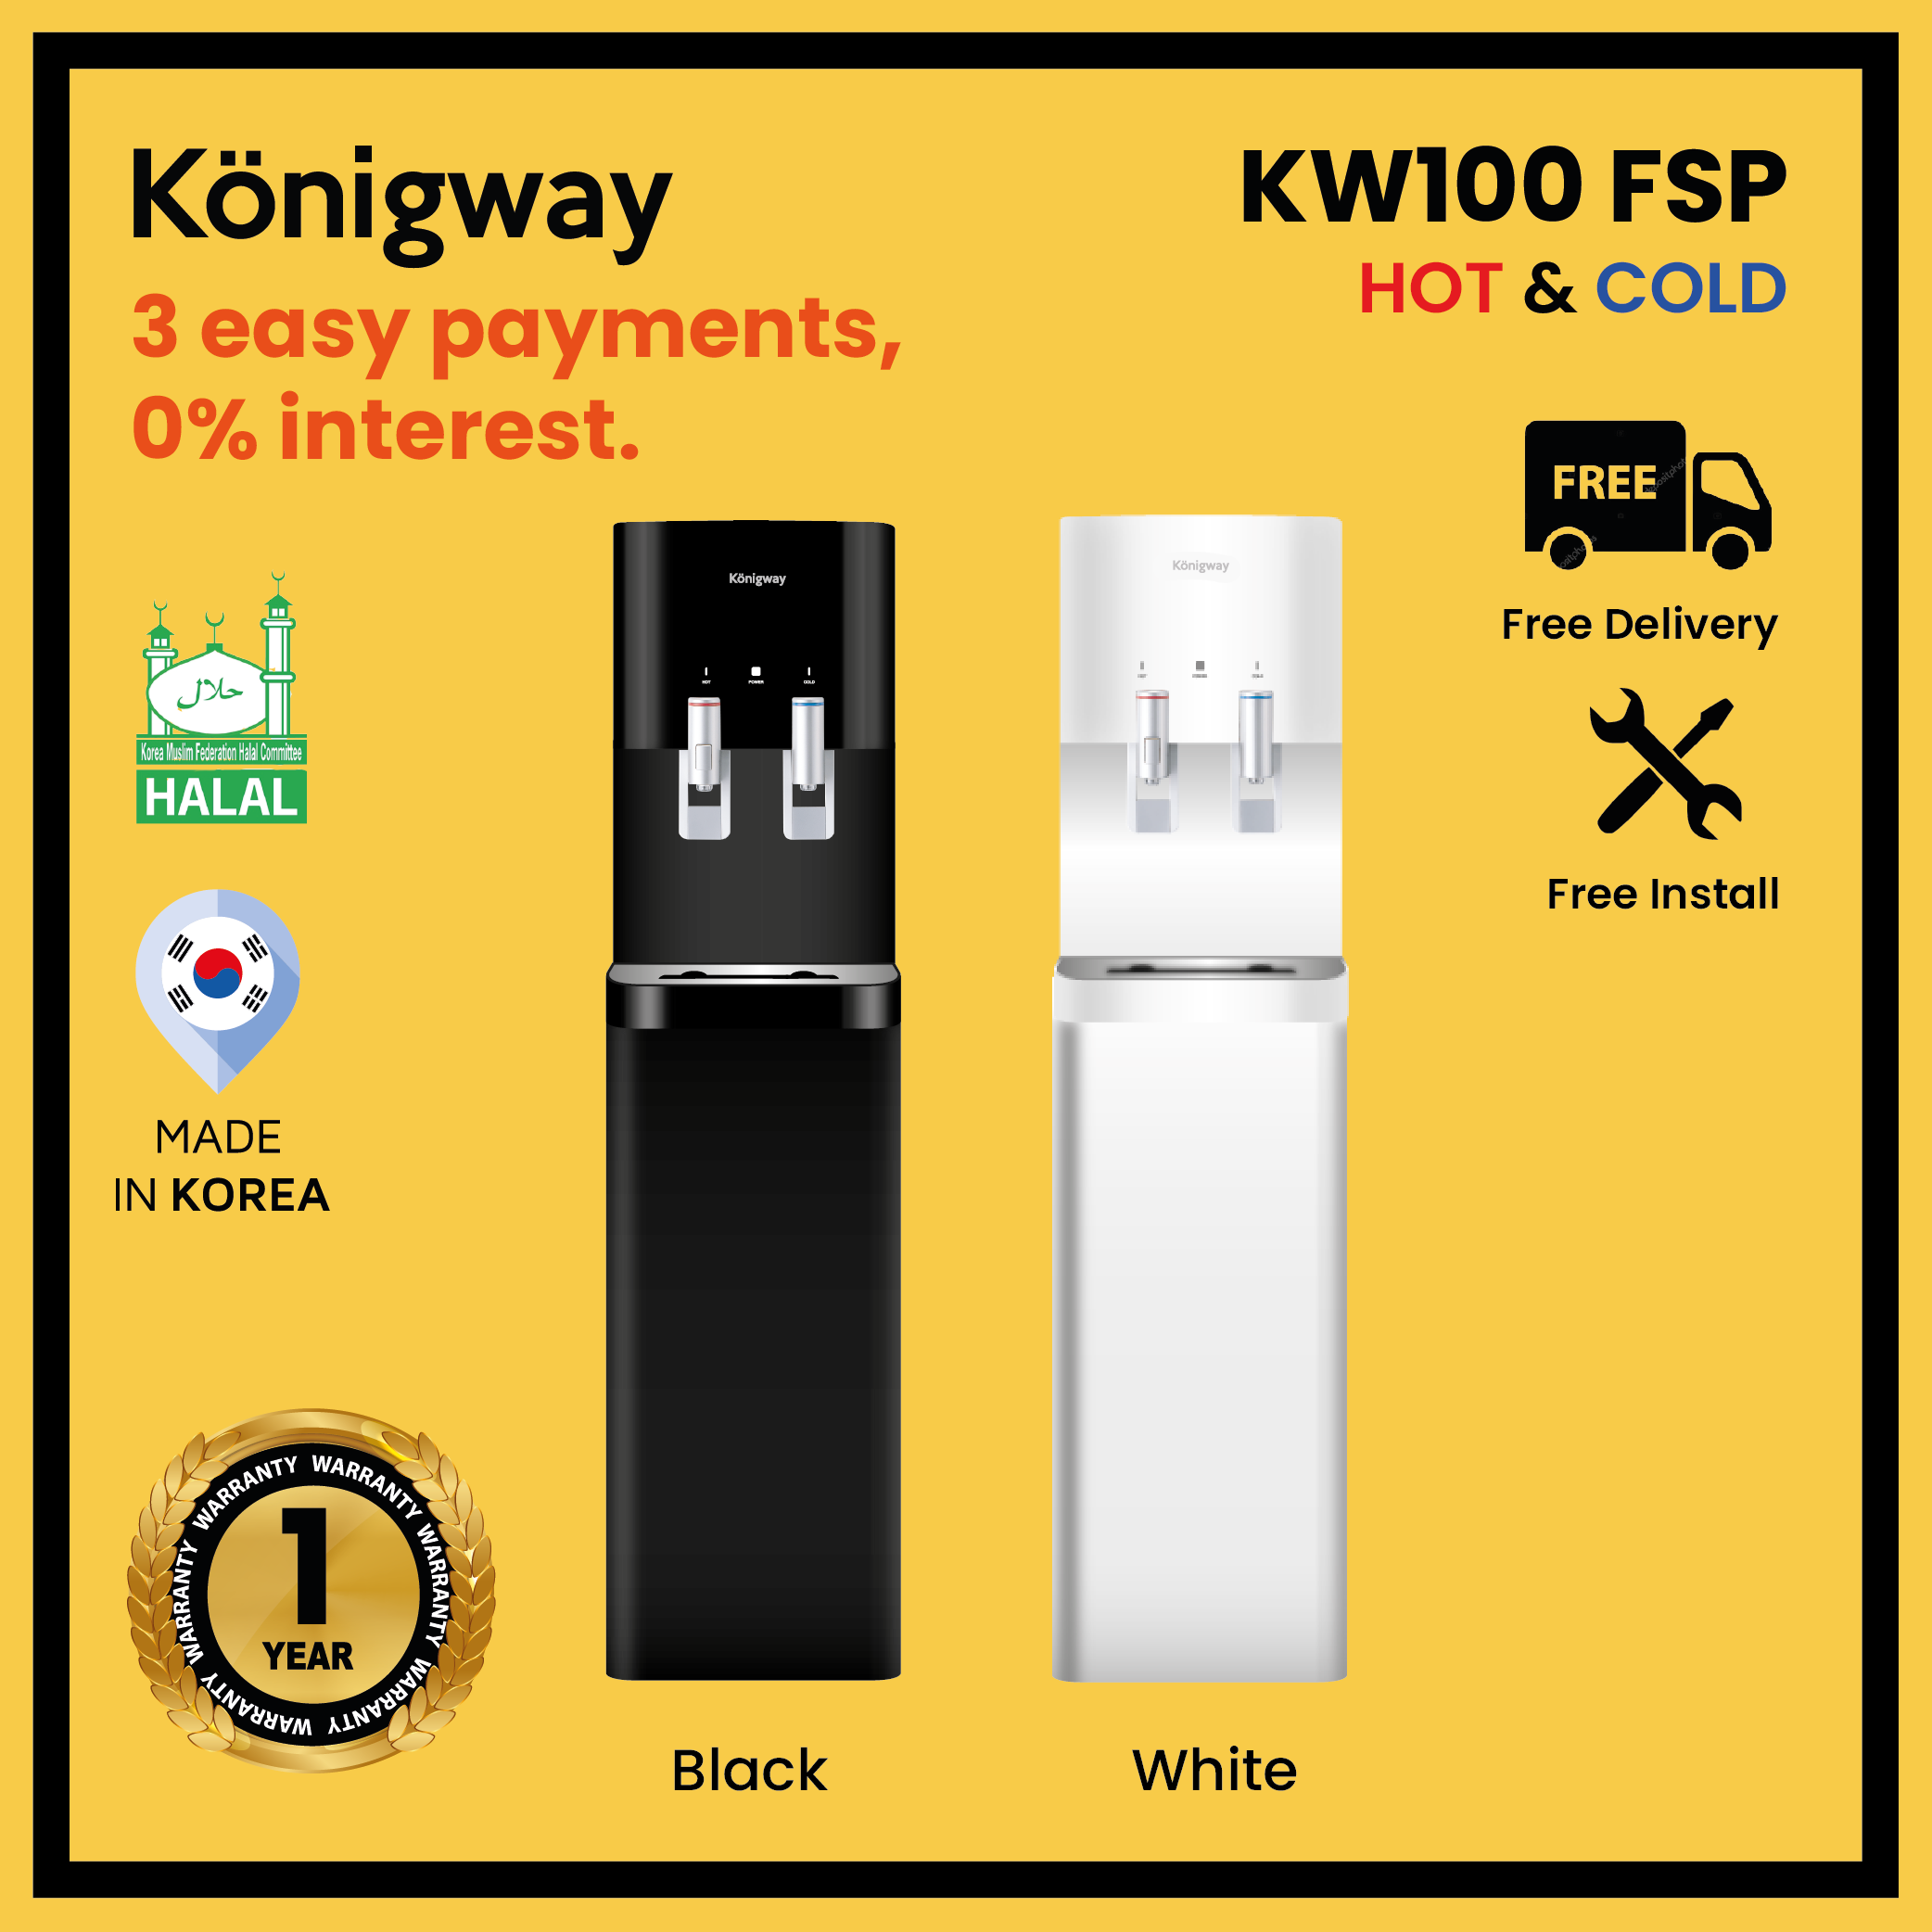 KW100 FSP-01.png